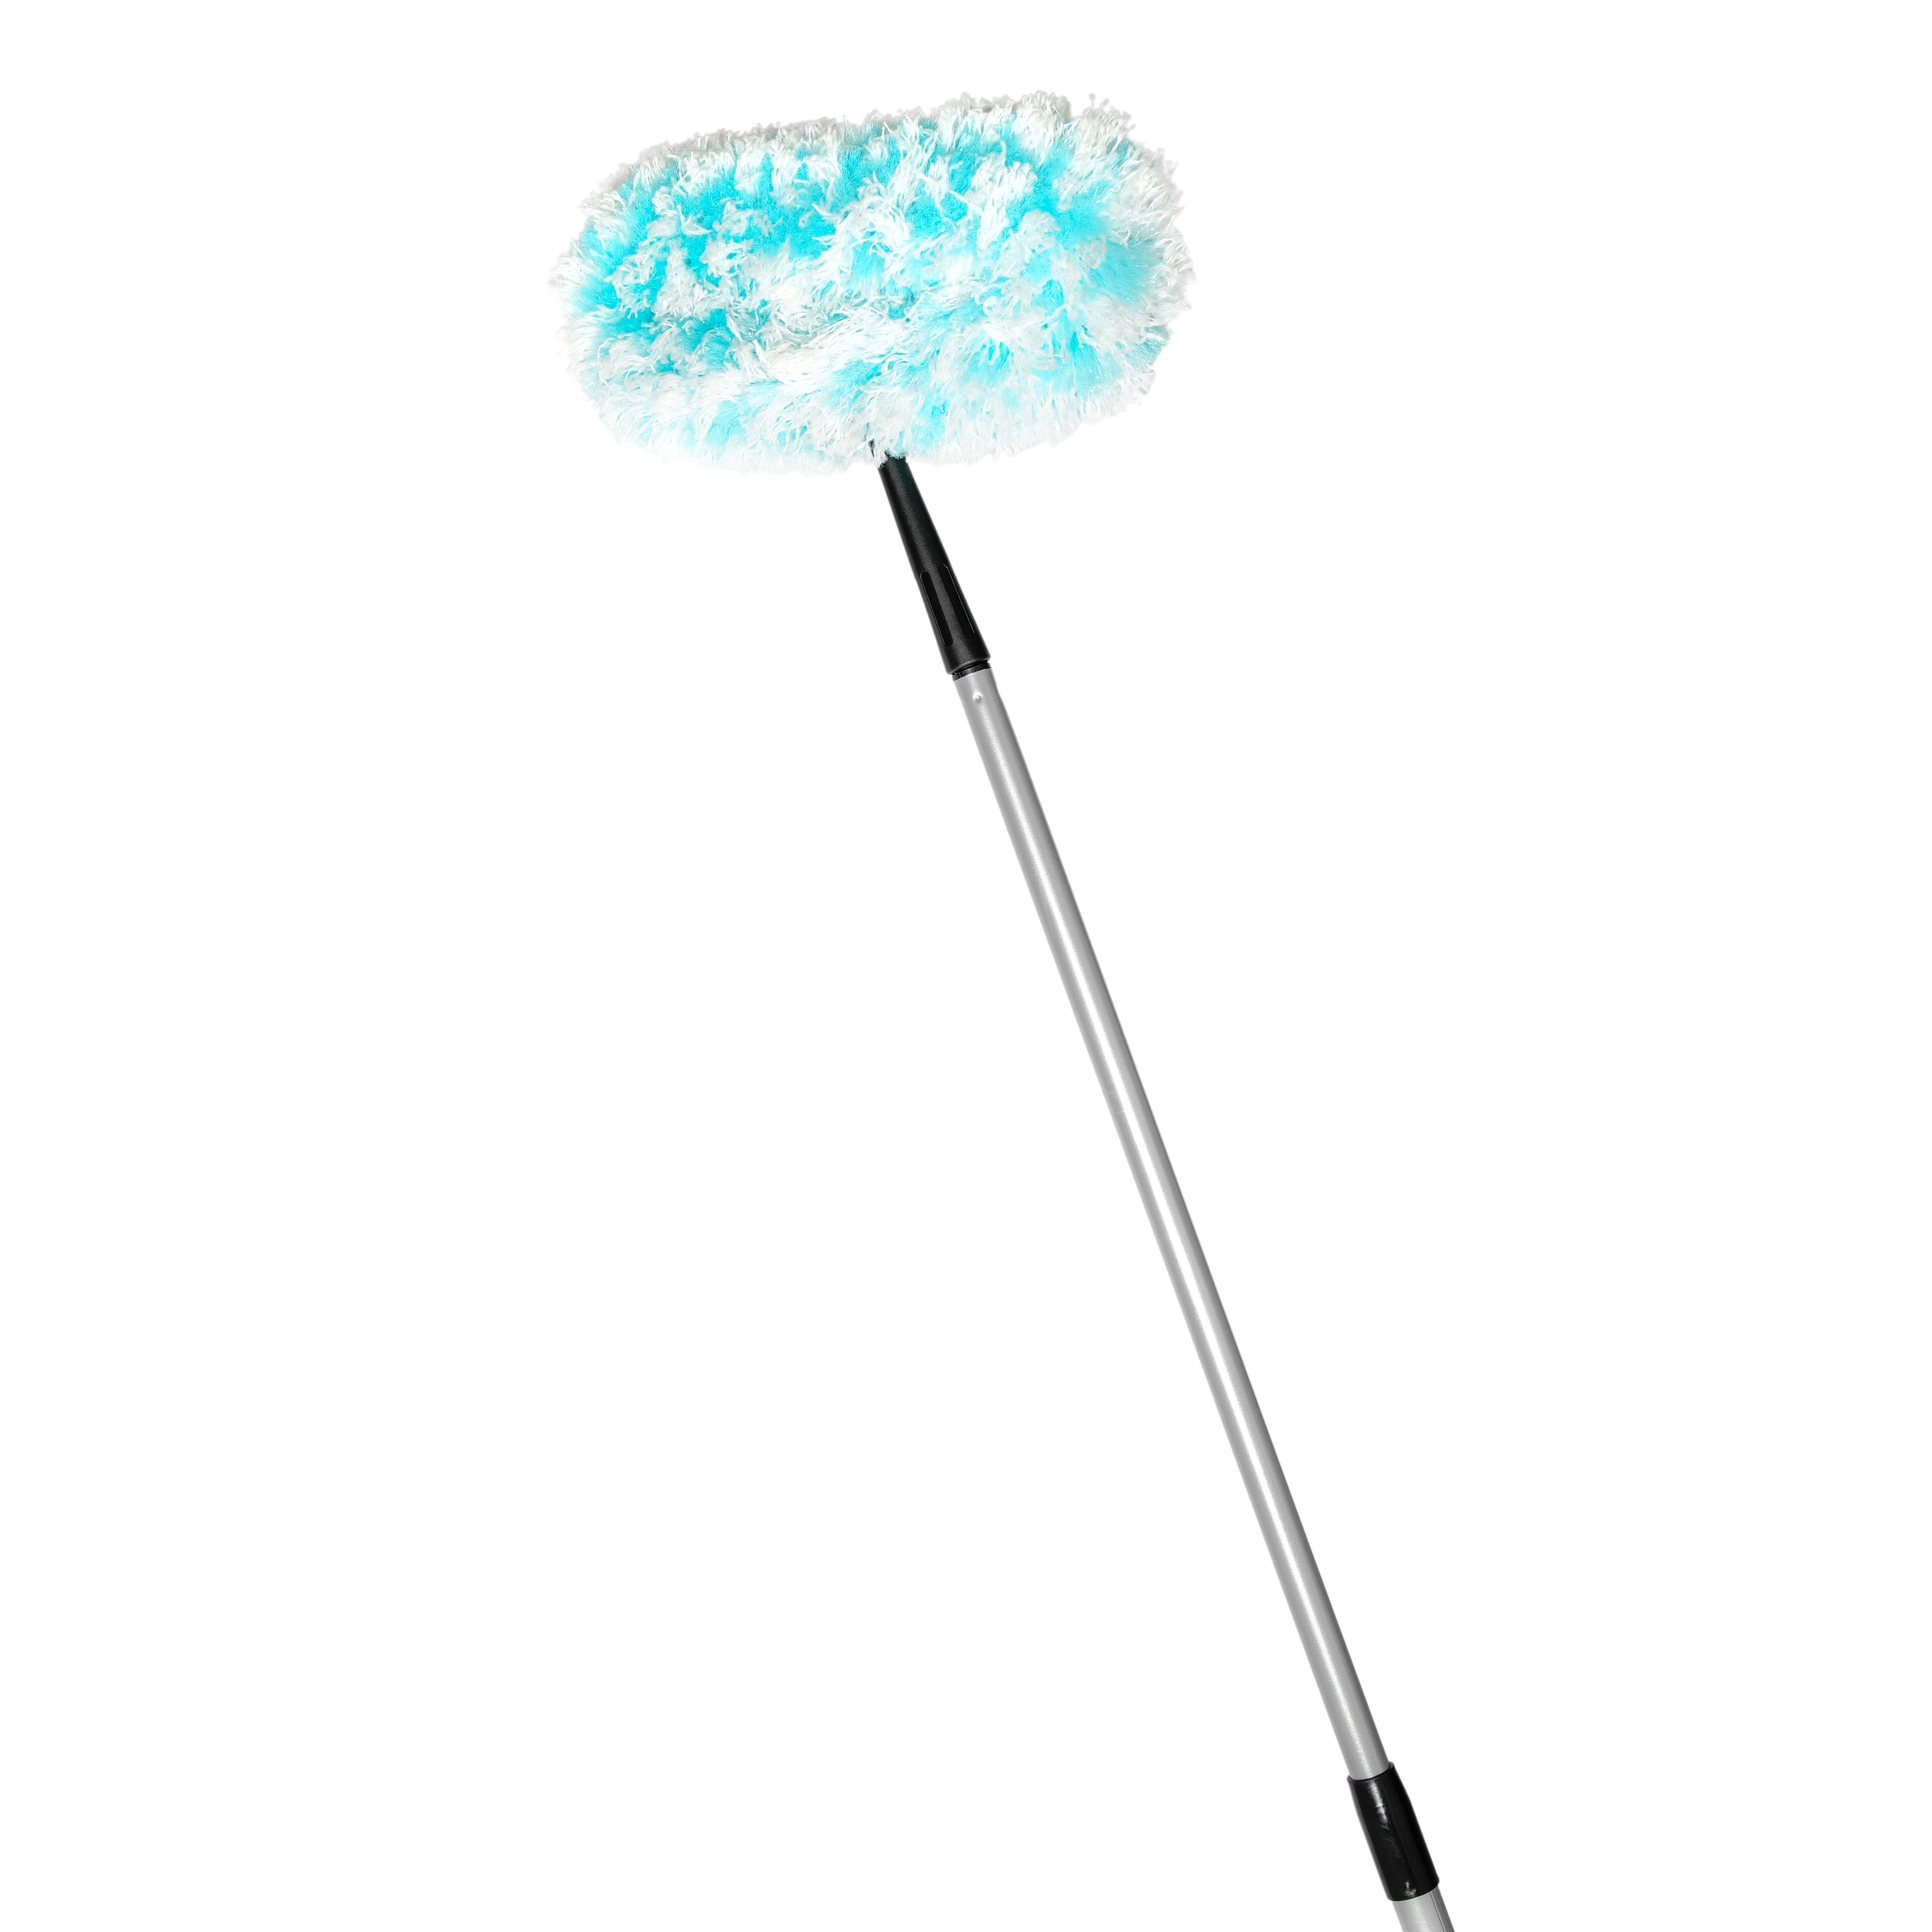 VerPetridure Clearance Foot Flexible Microfiber Ceiling & Fan Cleaner  Duster Household Cleaning Tools,Bendable to Clean Any Fan Blade,Removable &  Washable Brush Head 